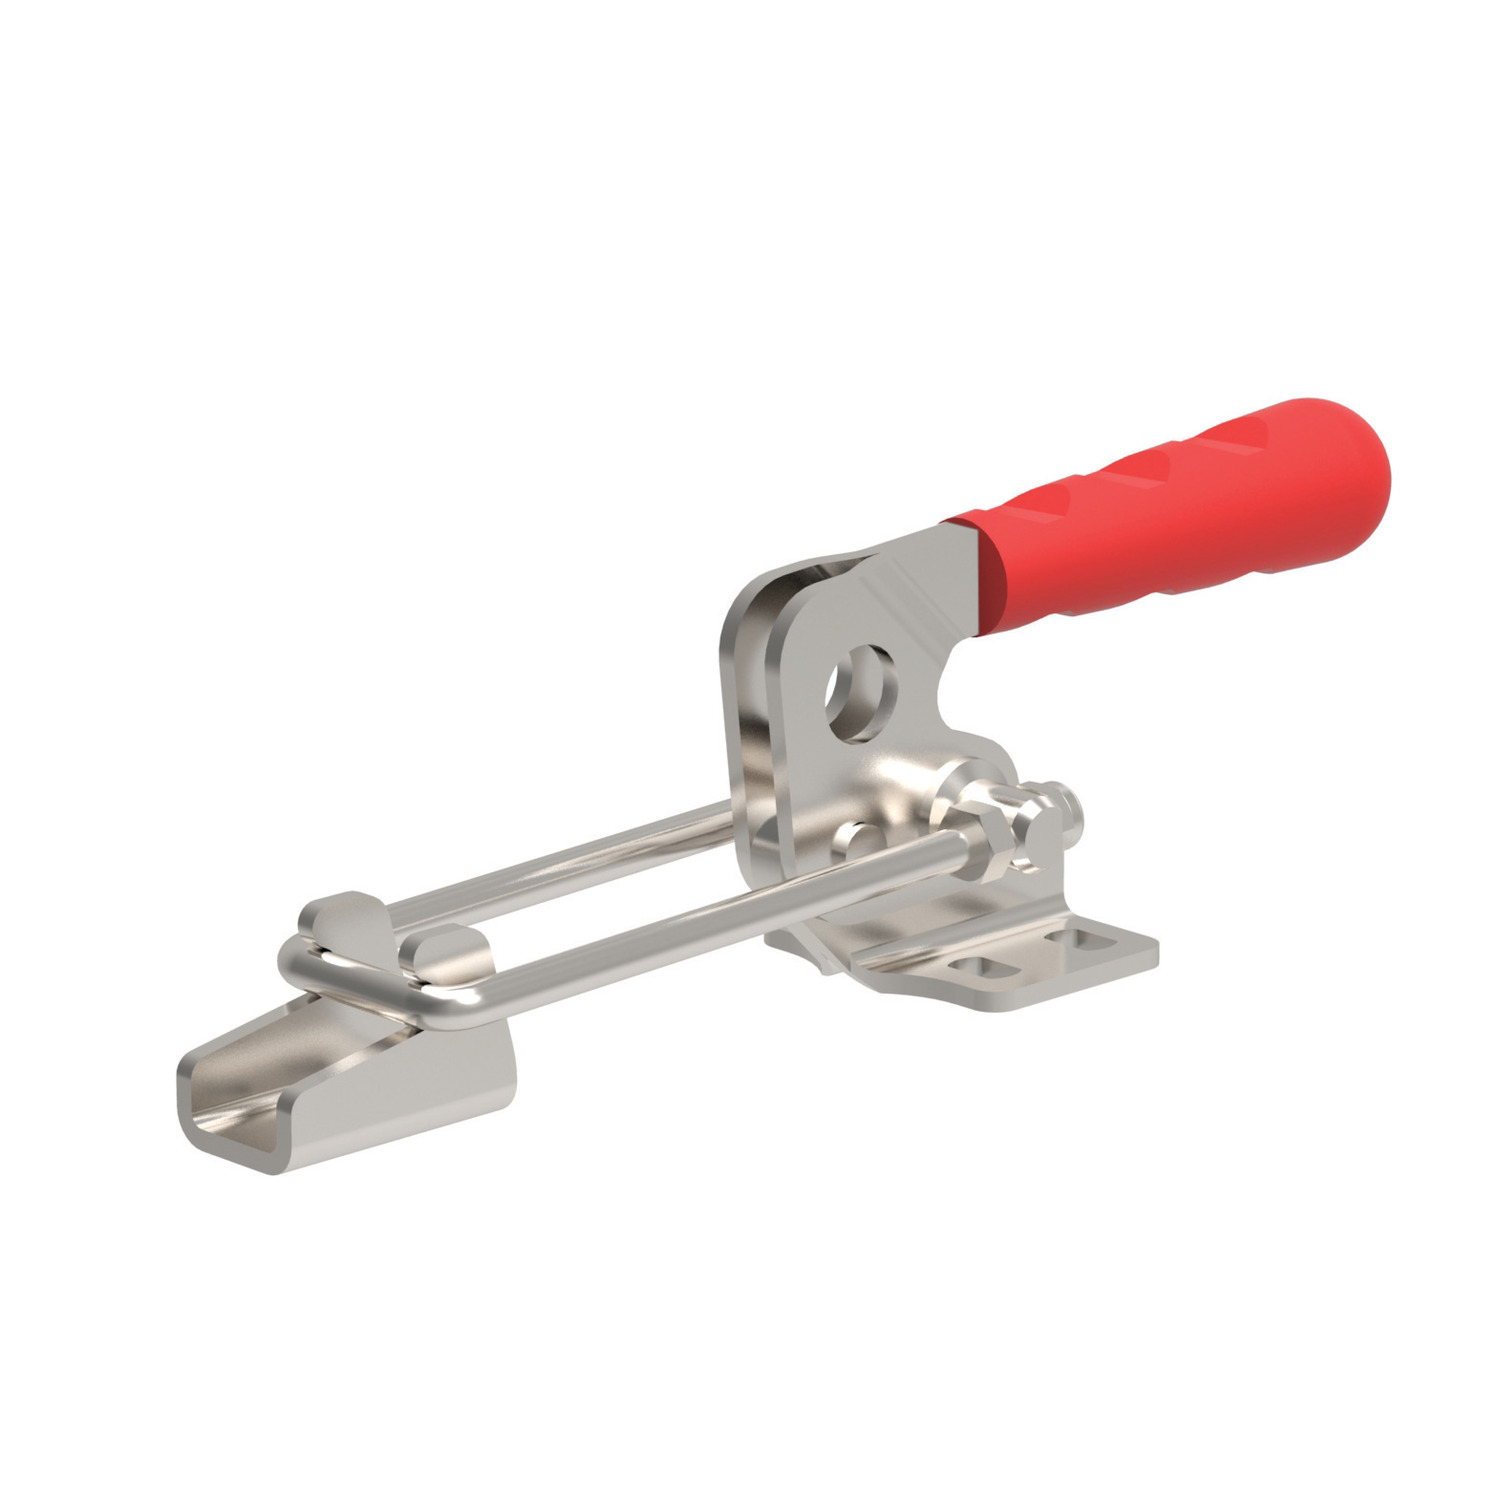 Economy Latch Type Toggle Clamps Latch type economy clamps complete with counter-holder.